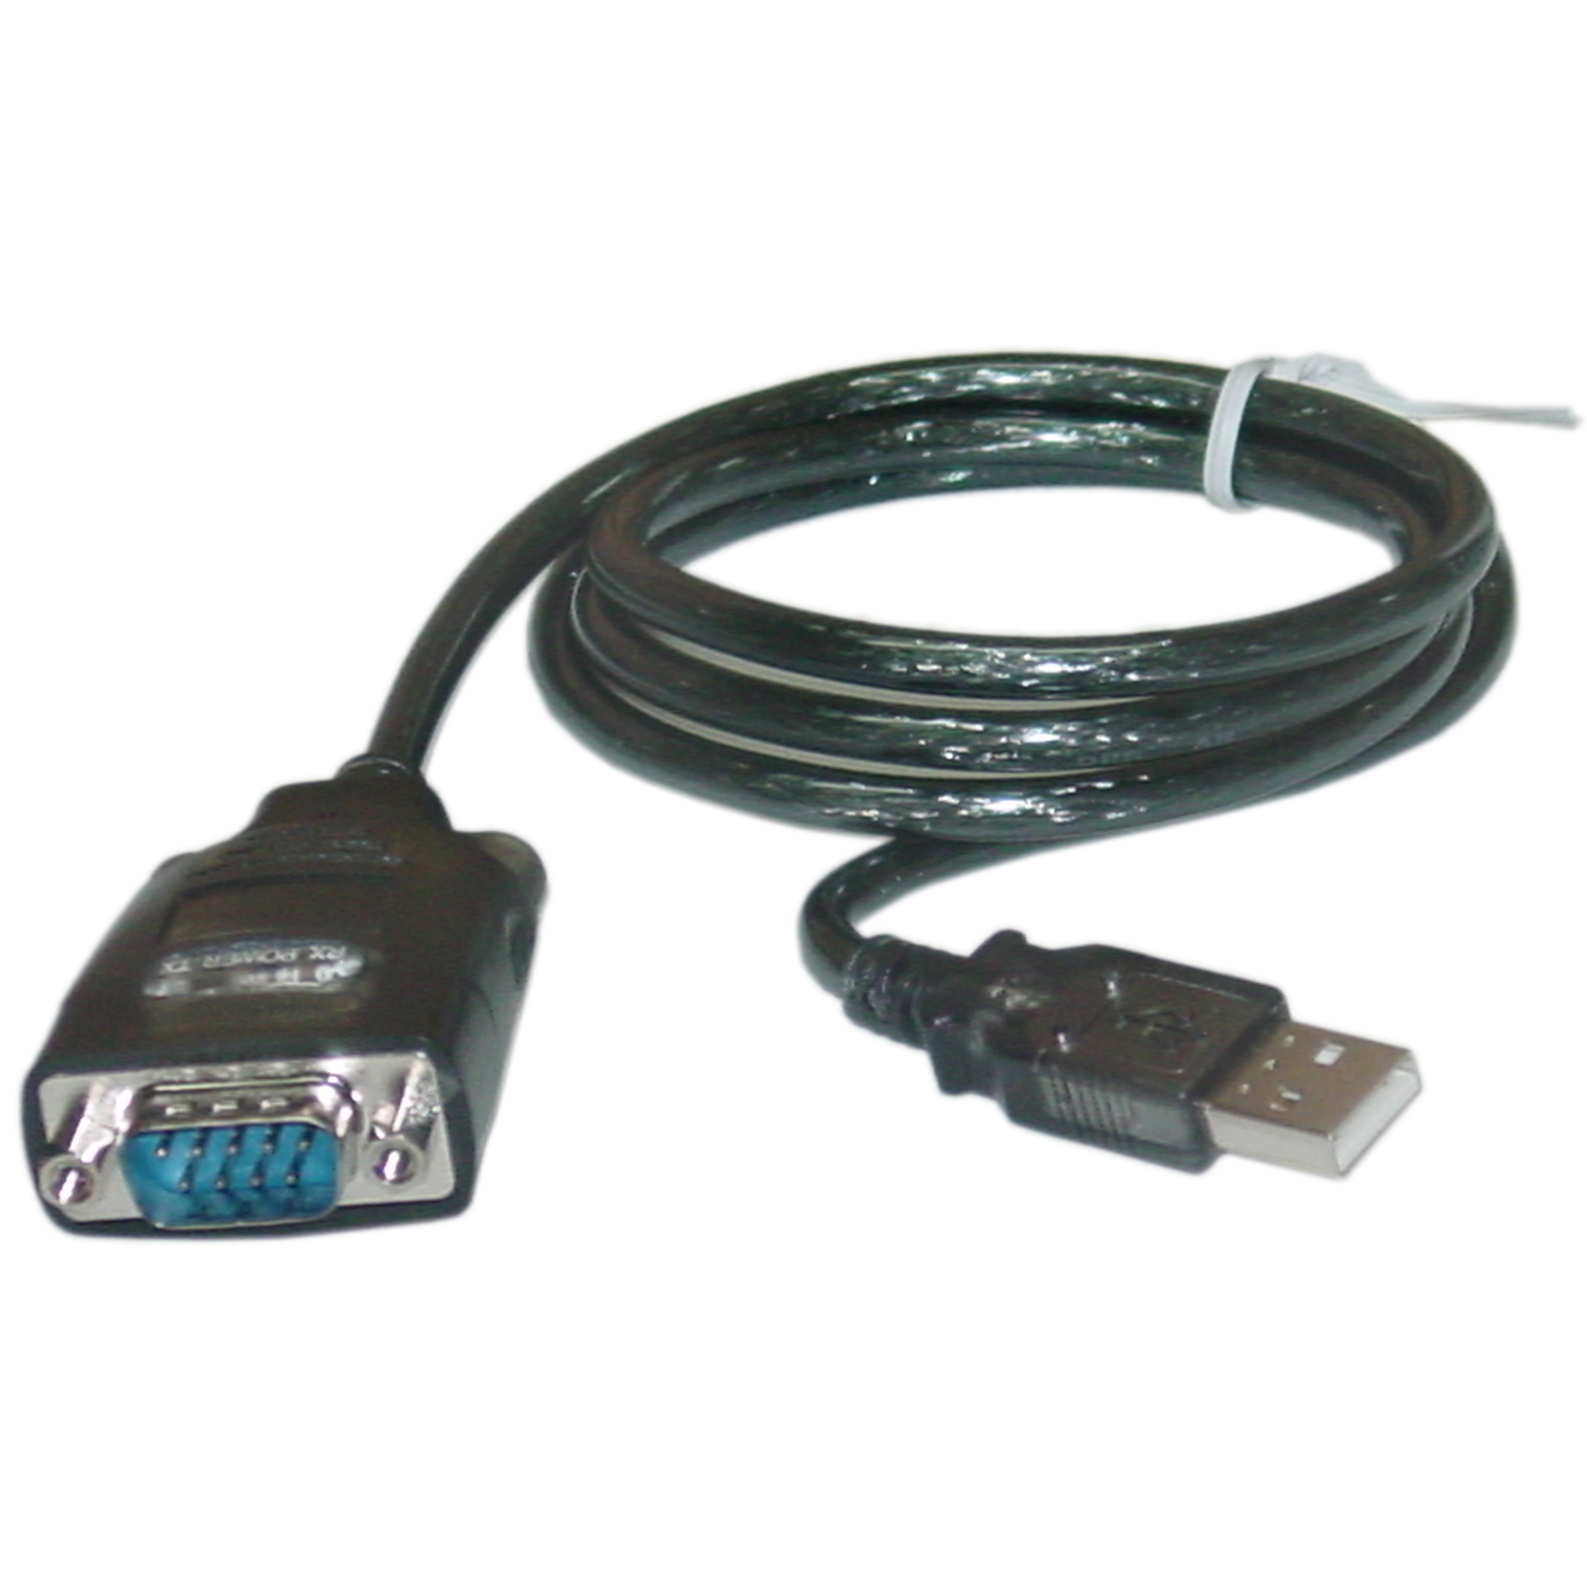 Computer Cables Wholesale USB to RS232 Serial Port 9Pins DB9 Cable Serial COM Port Adapter Cable Convertor 2017 Cable Length as The pic